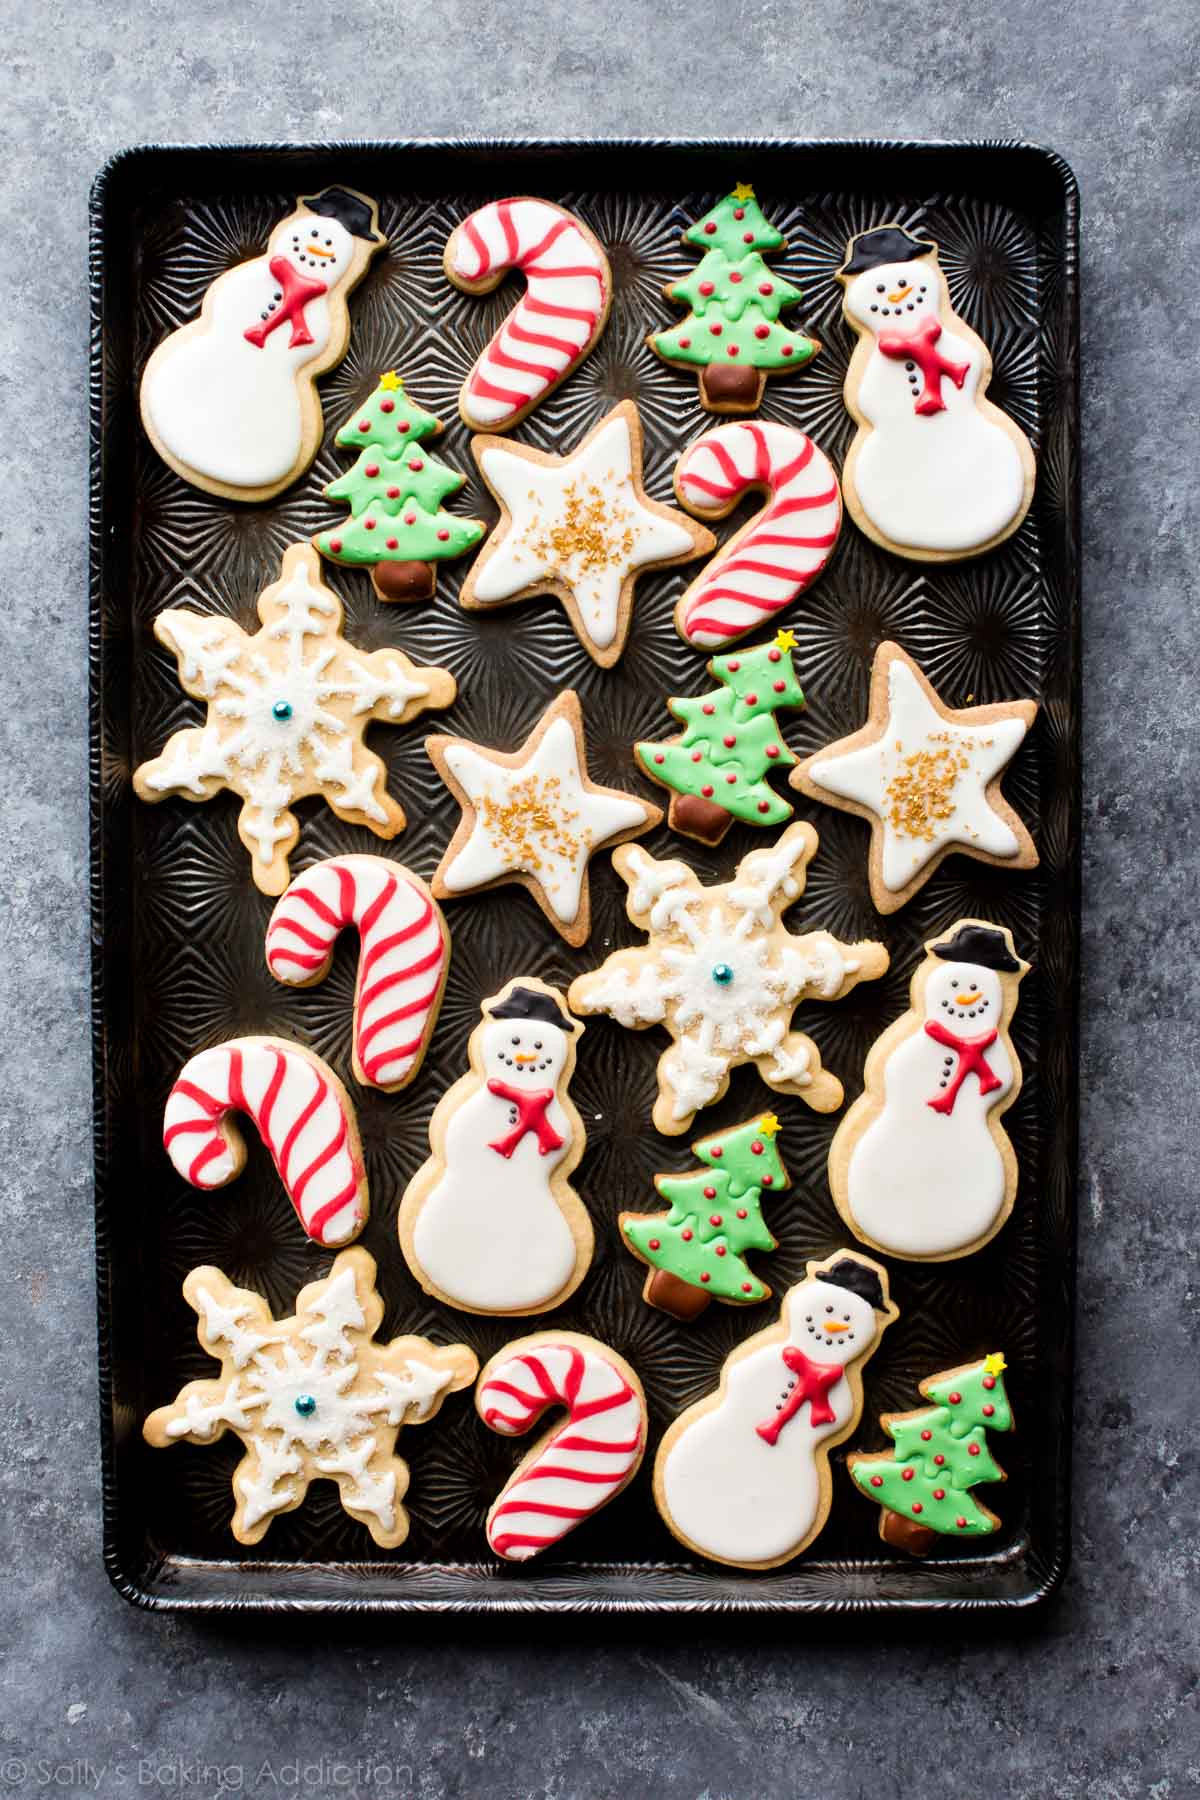 Decorated Christmas Cookies Recipes
 How to Decorate Sugar Cookies